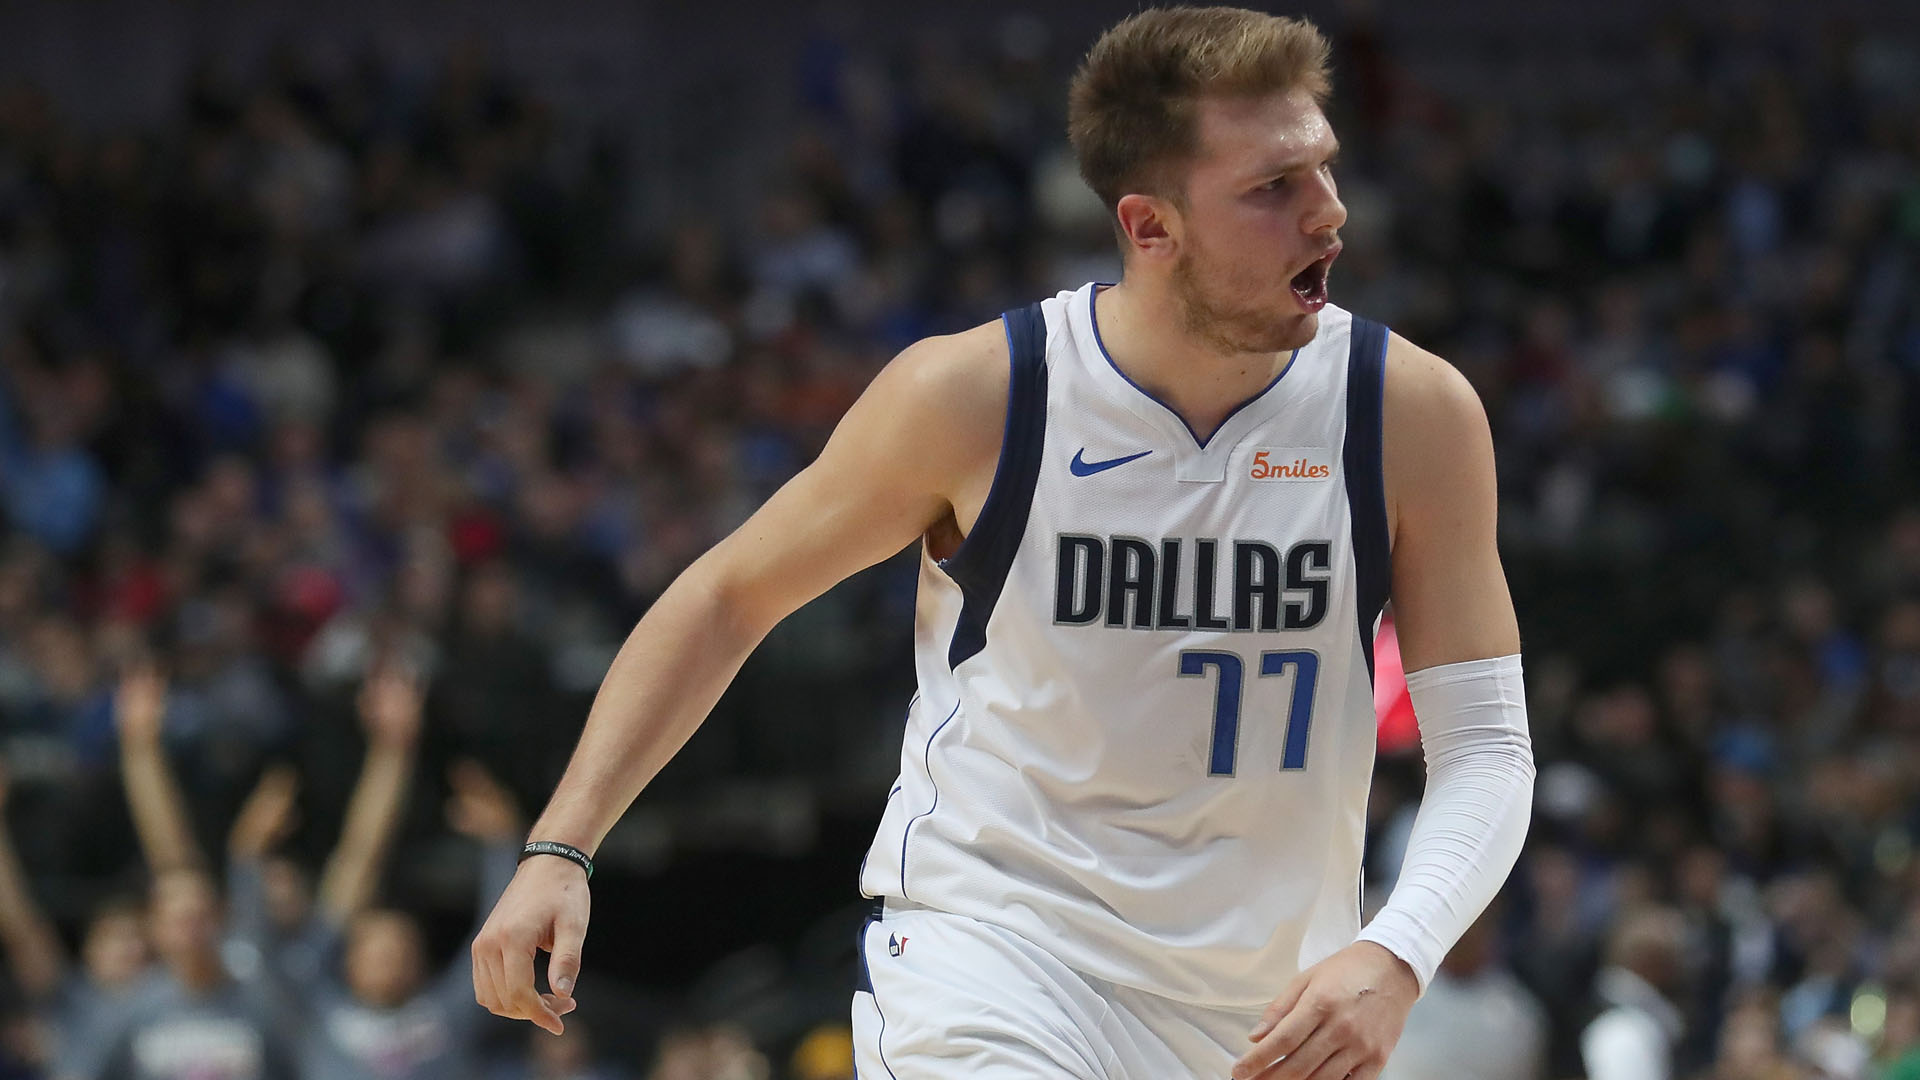 The Dallas Mavericks upset the Houston Rockets in the NBA thanks to Luka Doncic.